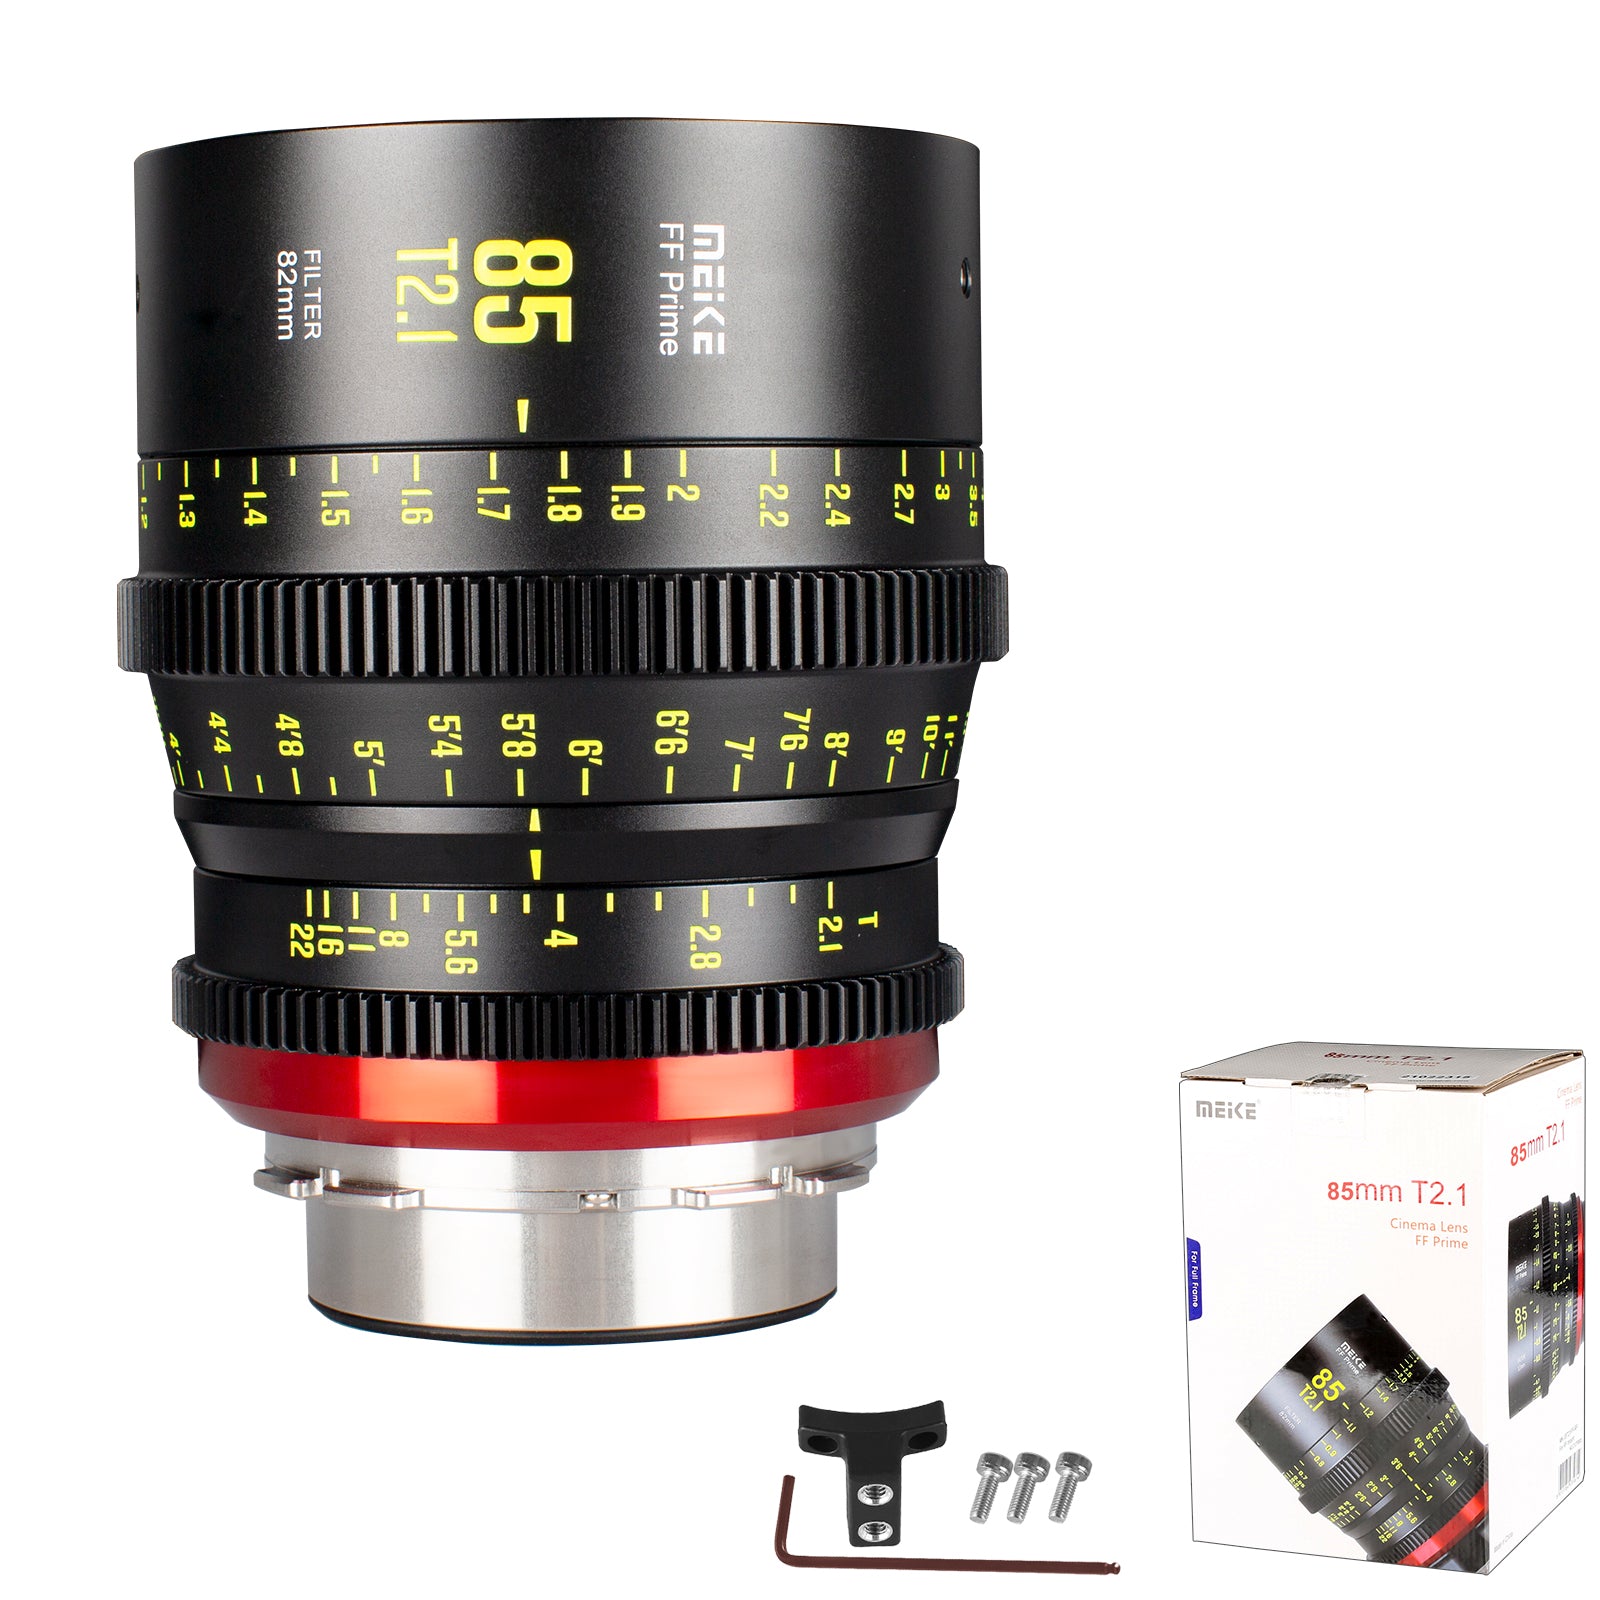 Meike Cinema Full Frame Cinema Prime 85mm T2.1 Lens (PL Mount) with Accessories and a Box